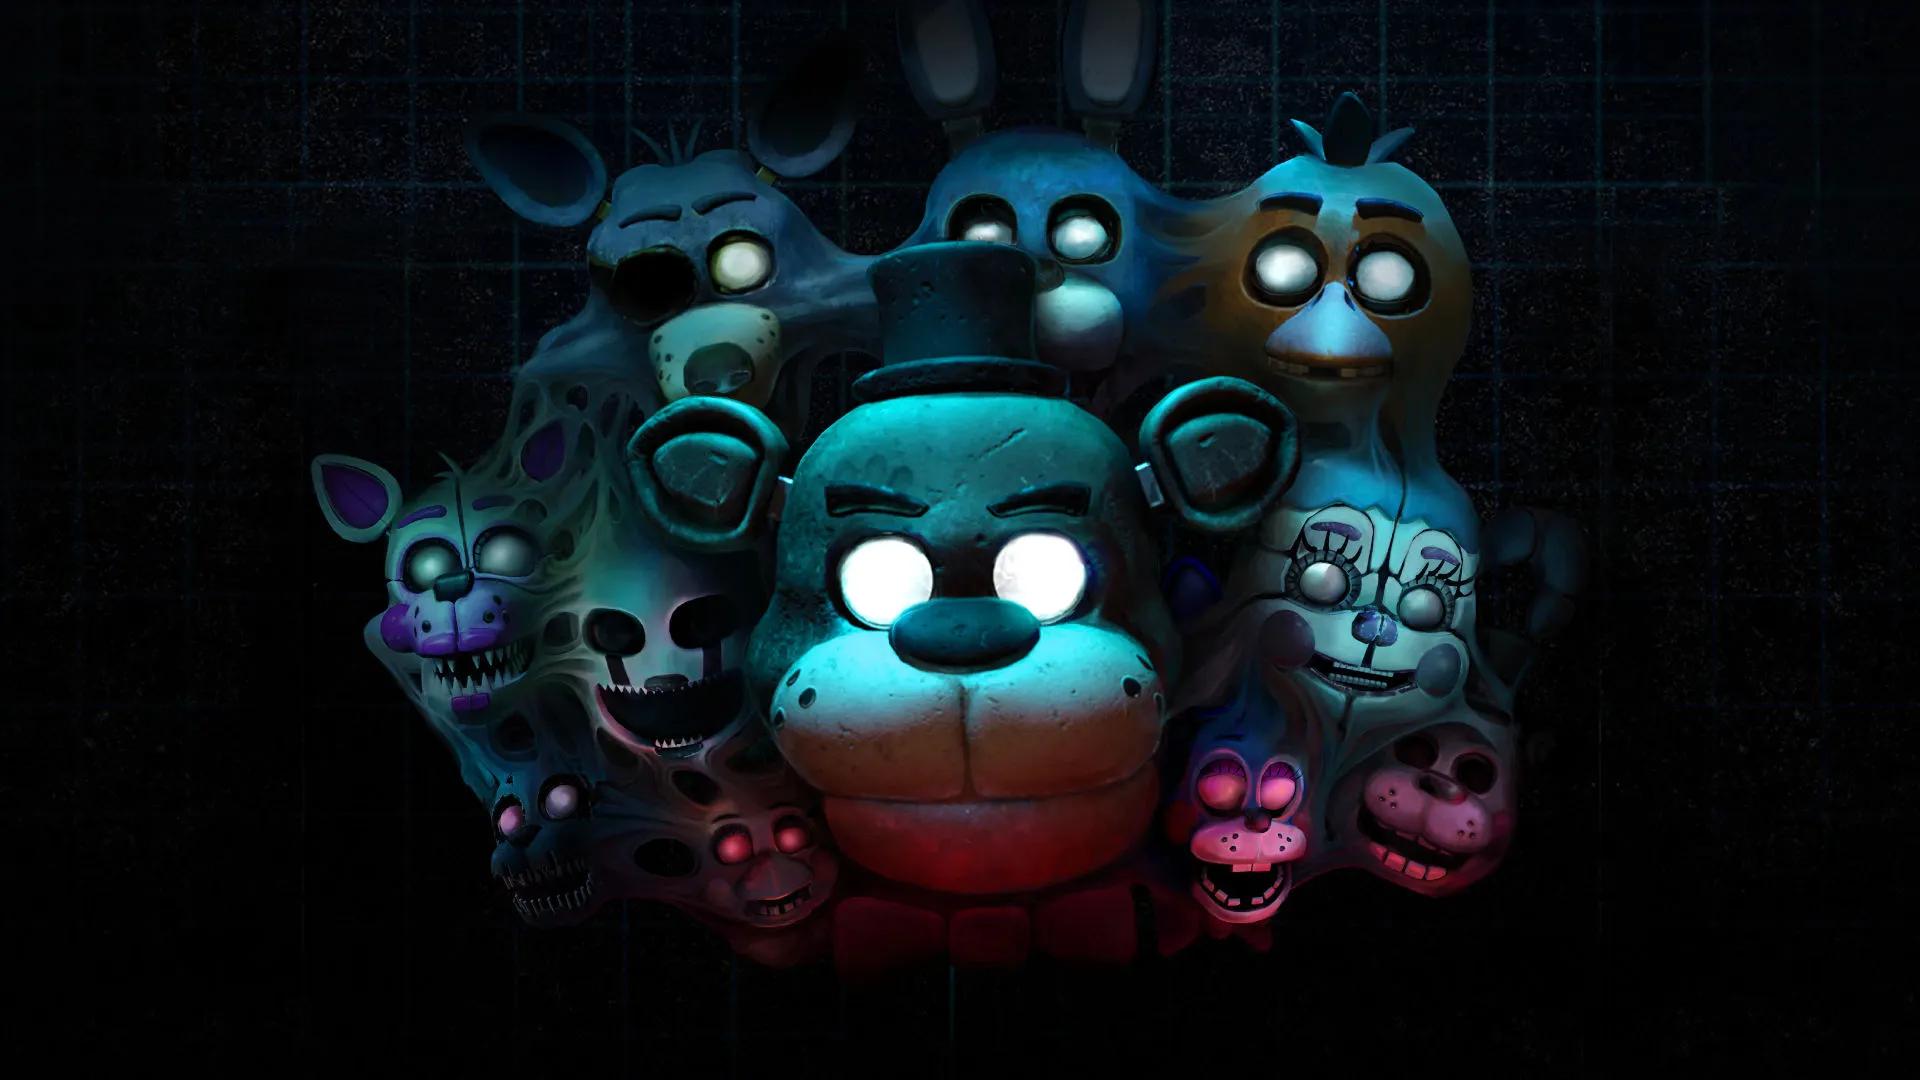 Five Nights at Freddy's 2: Release Date Announced, Expected Plot and Cast